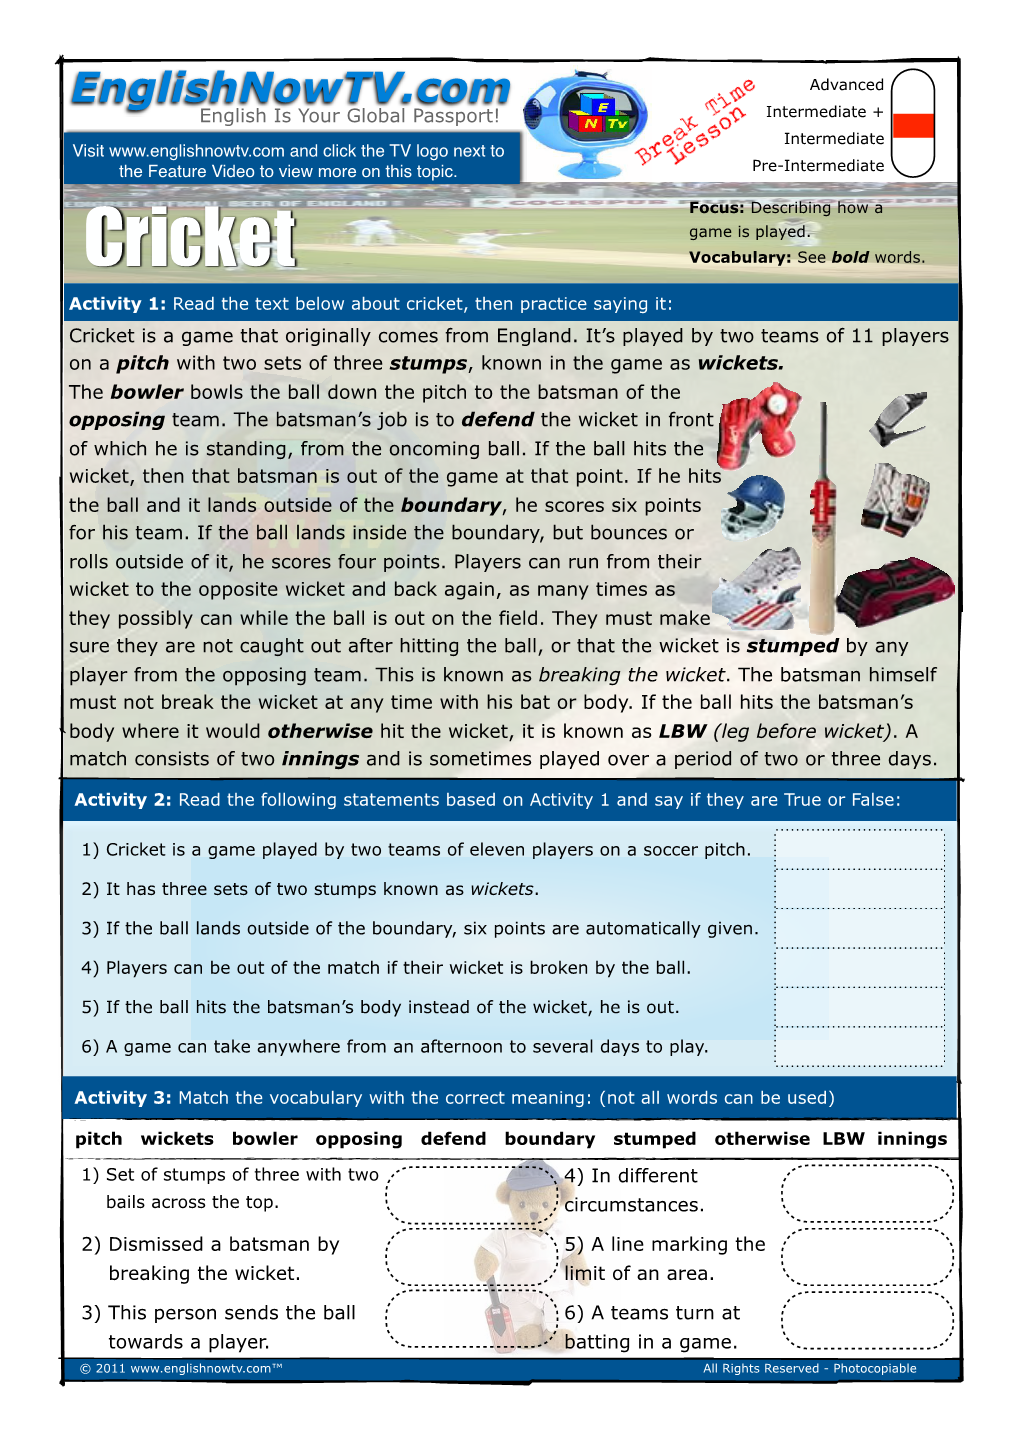 Cricket Vocabulary: See Bold Words